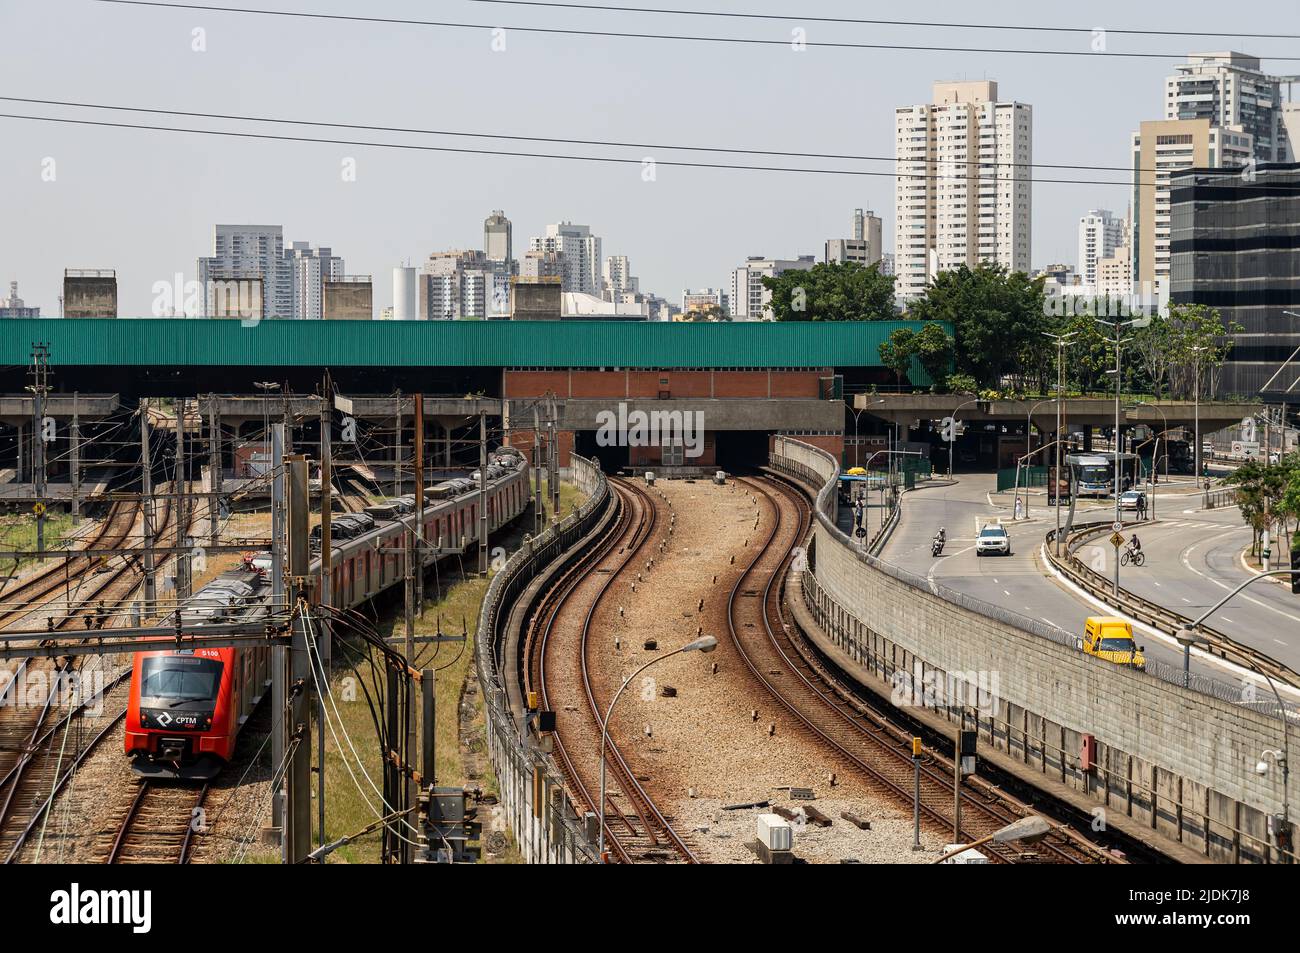 West side view of Palmeiras-Barra Funda terminal station with partial view of the train tracks and Mario de Andrade avenue under sunny clear blue sky. Stock Photo